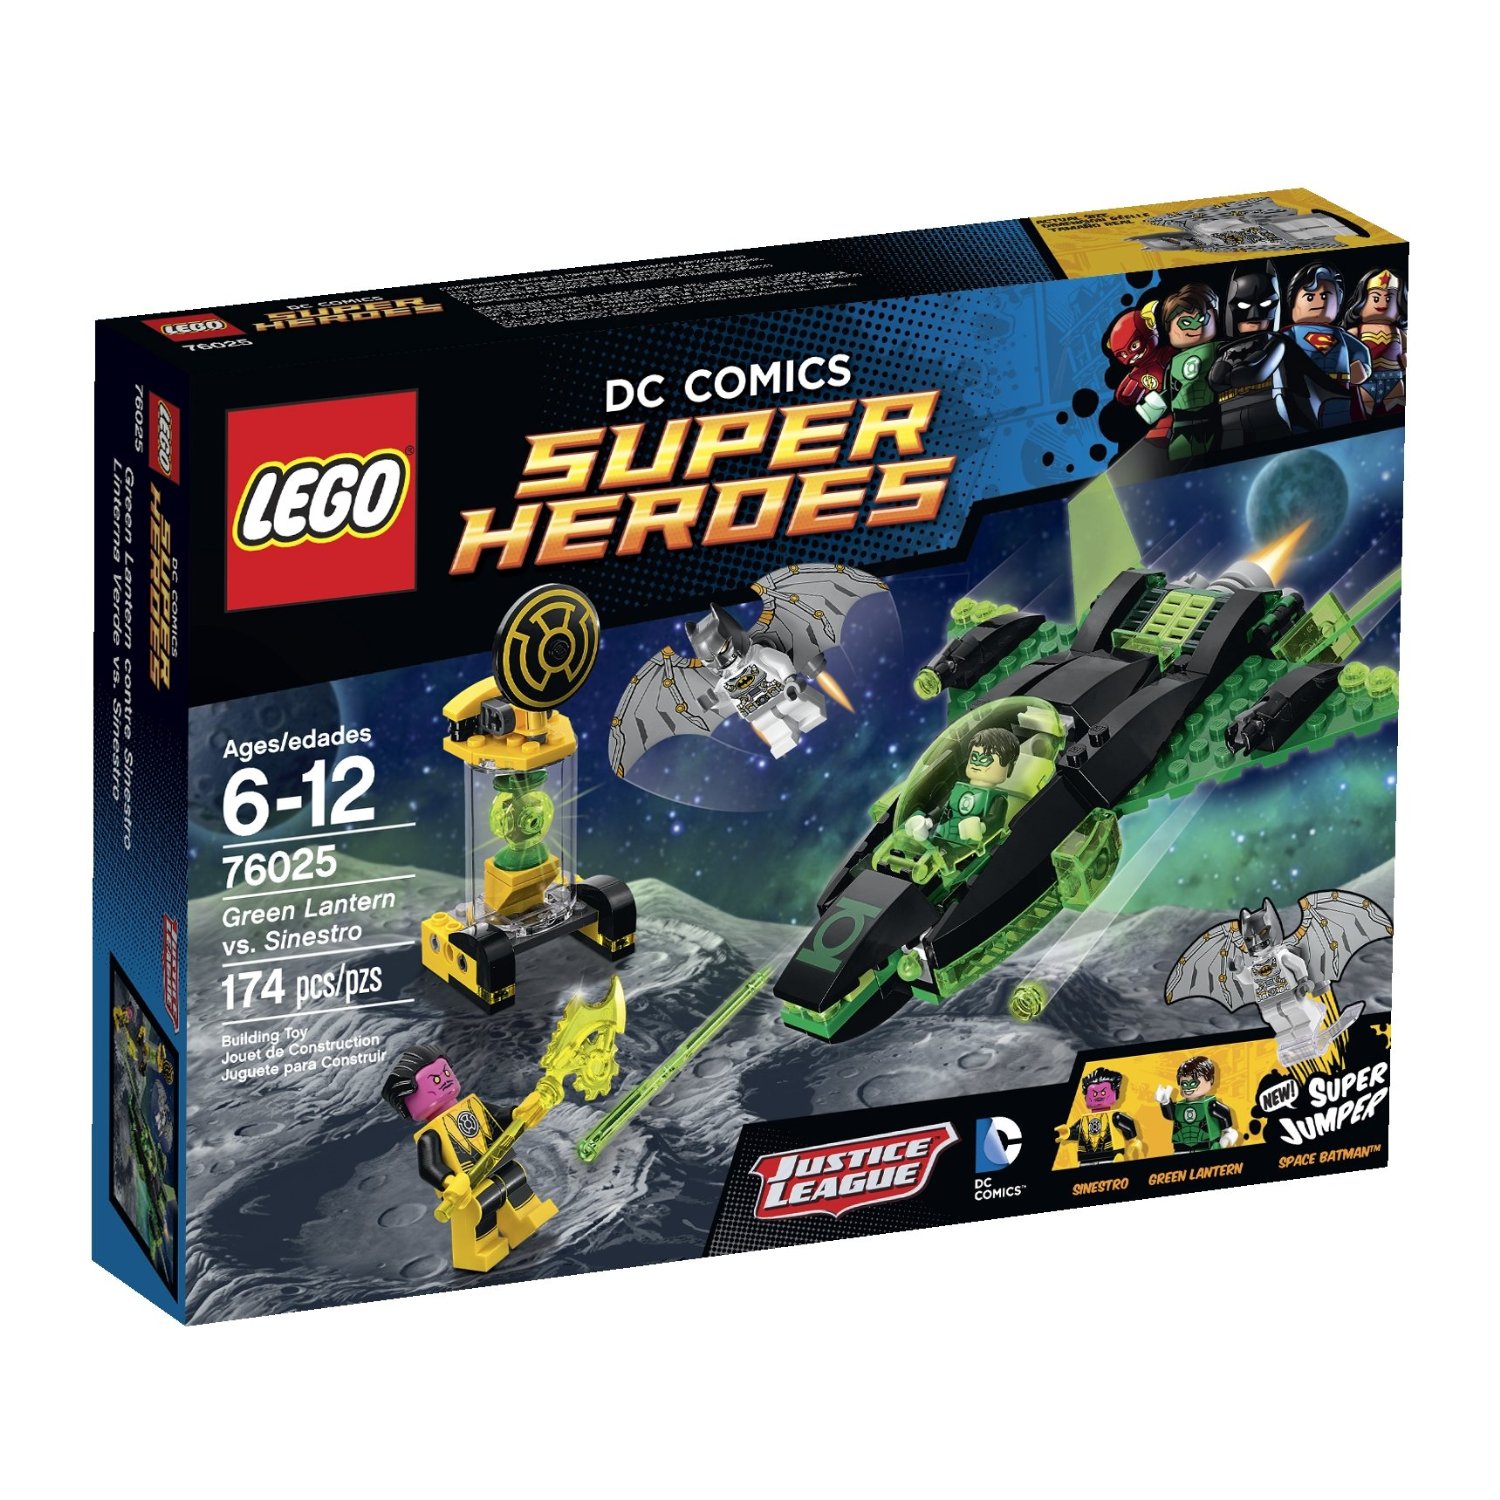 DC and Marvel Super Heroes sets on sale on Amazon - FBTB